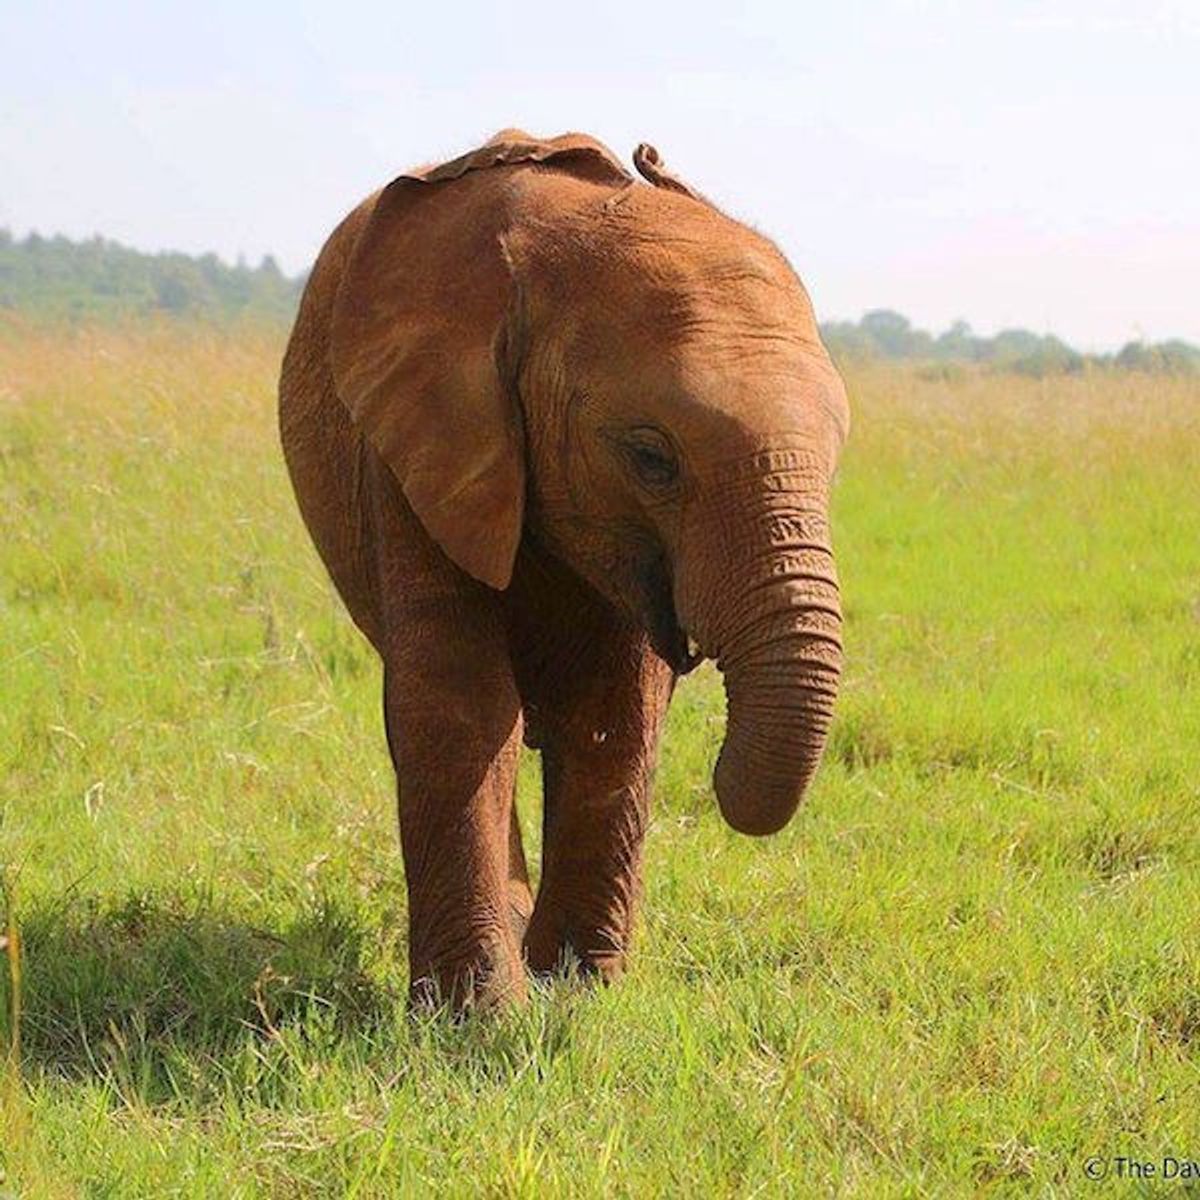 A Voice For The Elephants